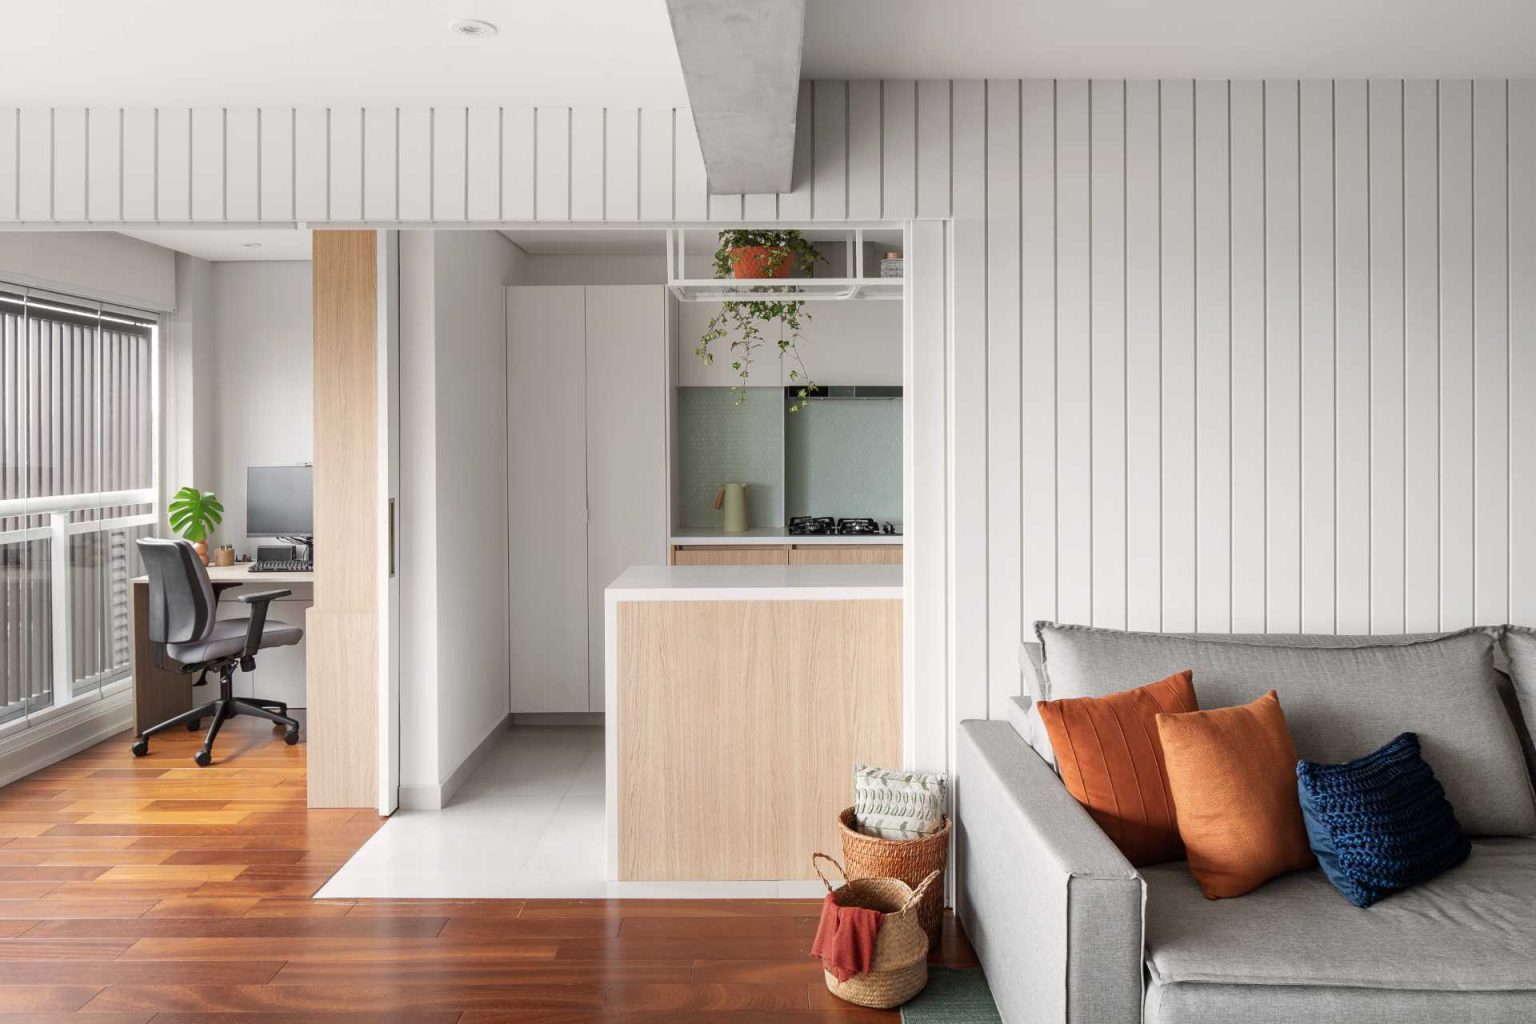 A Home Office And Kitchen Are Hidden Behind A Sliding Wall In This ...